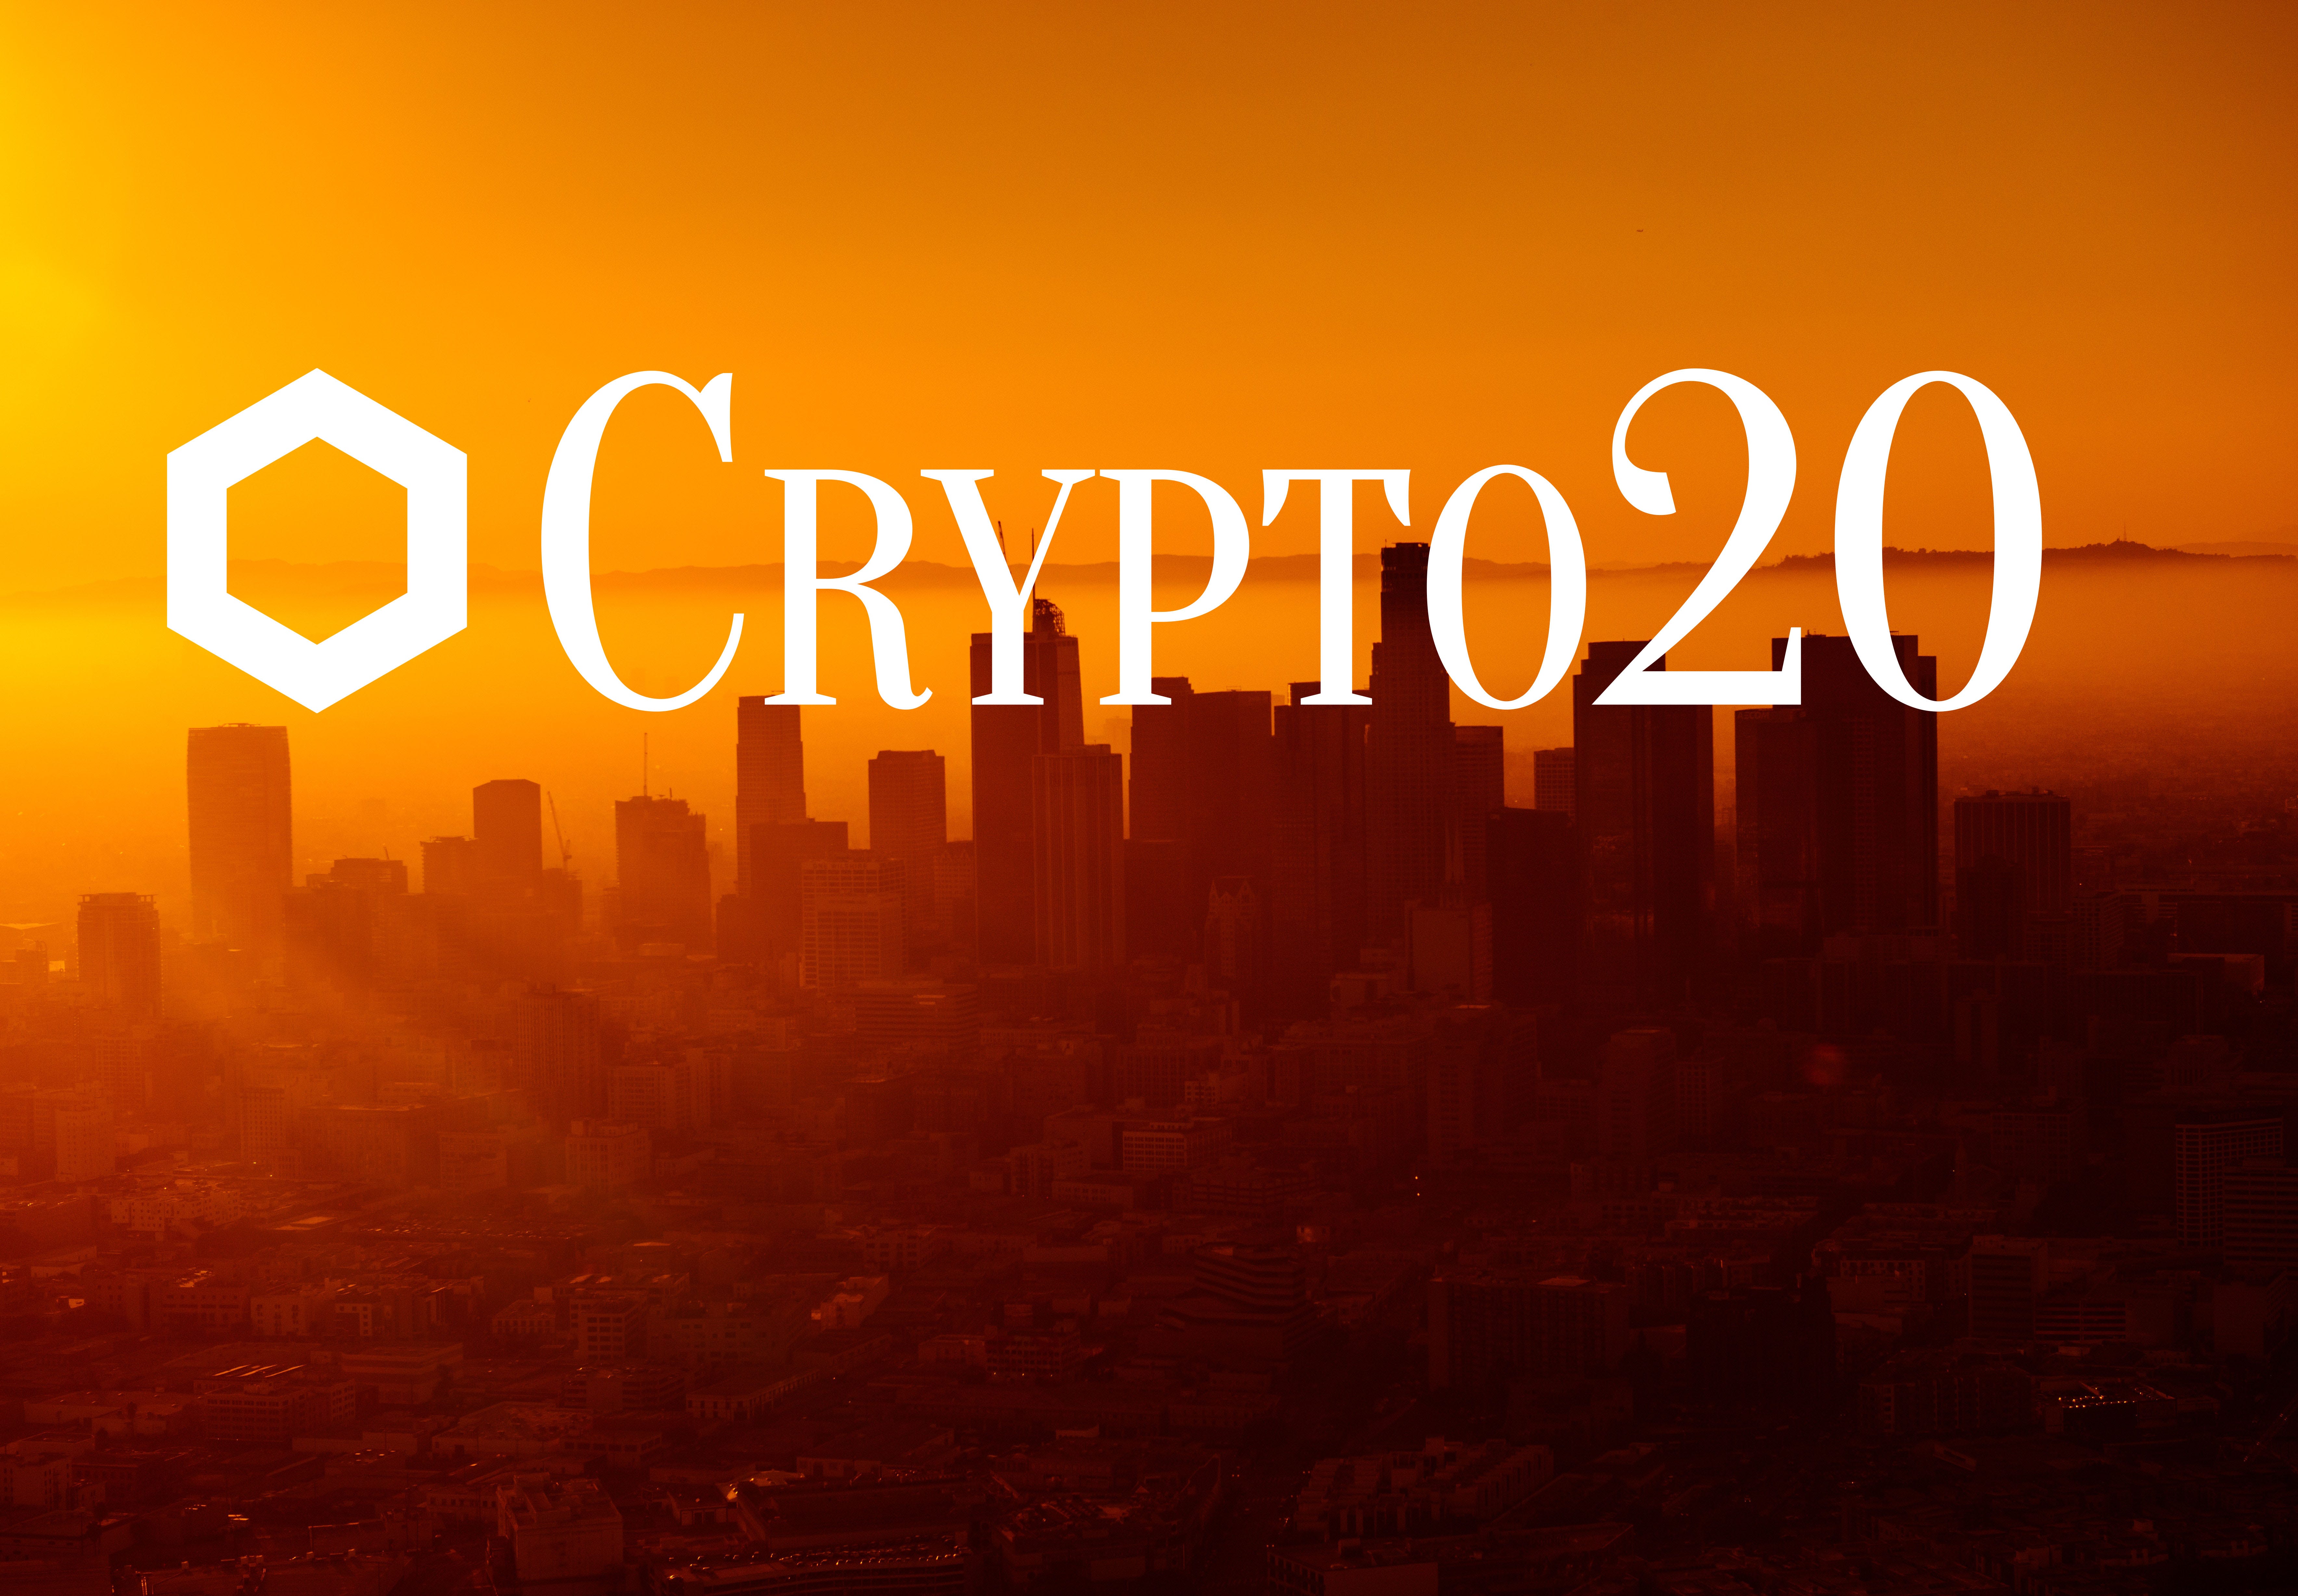 CRYPTO20 Reaches Fund Min. Cap Just Hours Into Pre-Sale ...